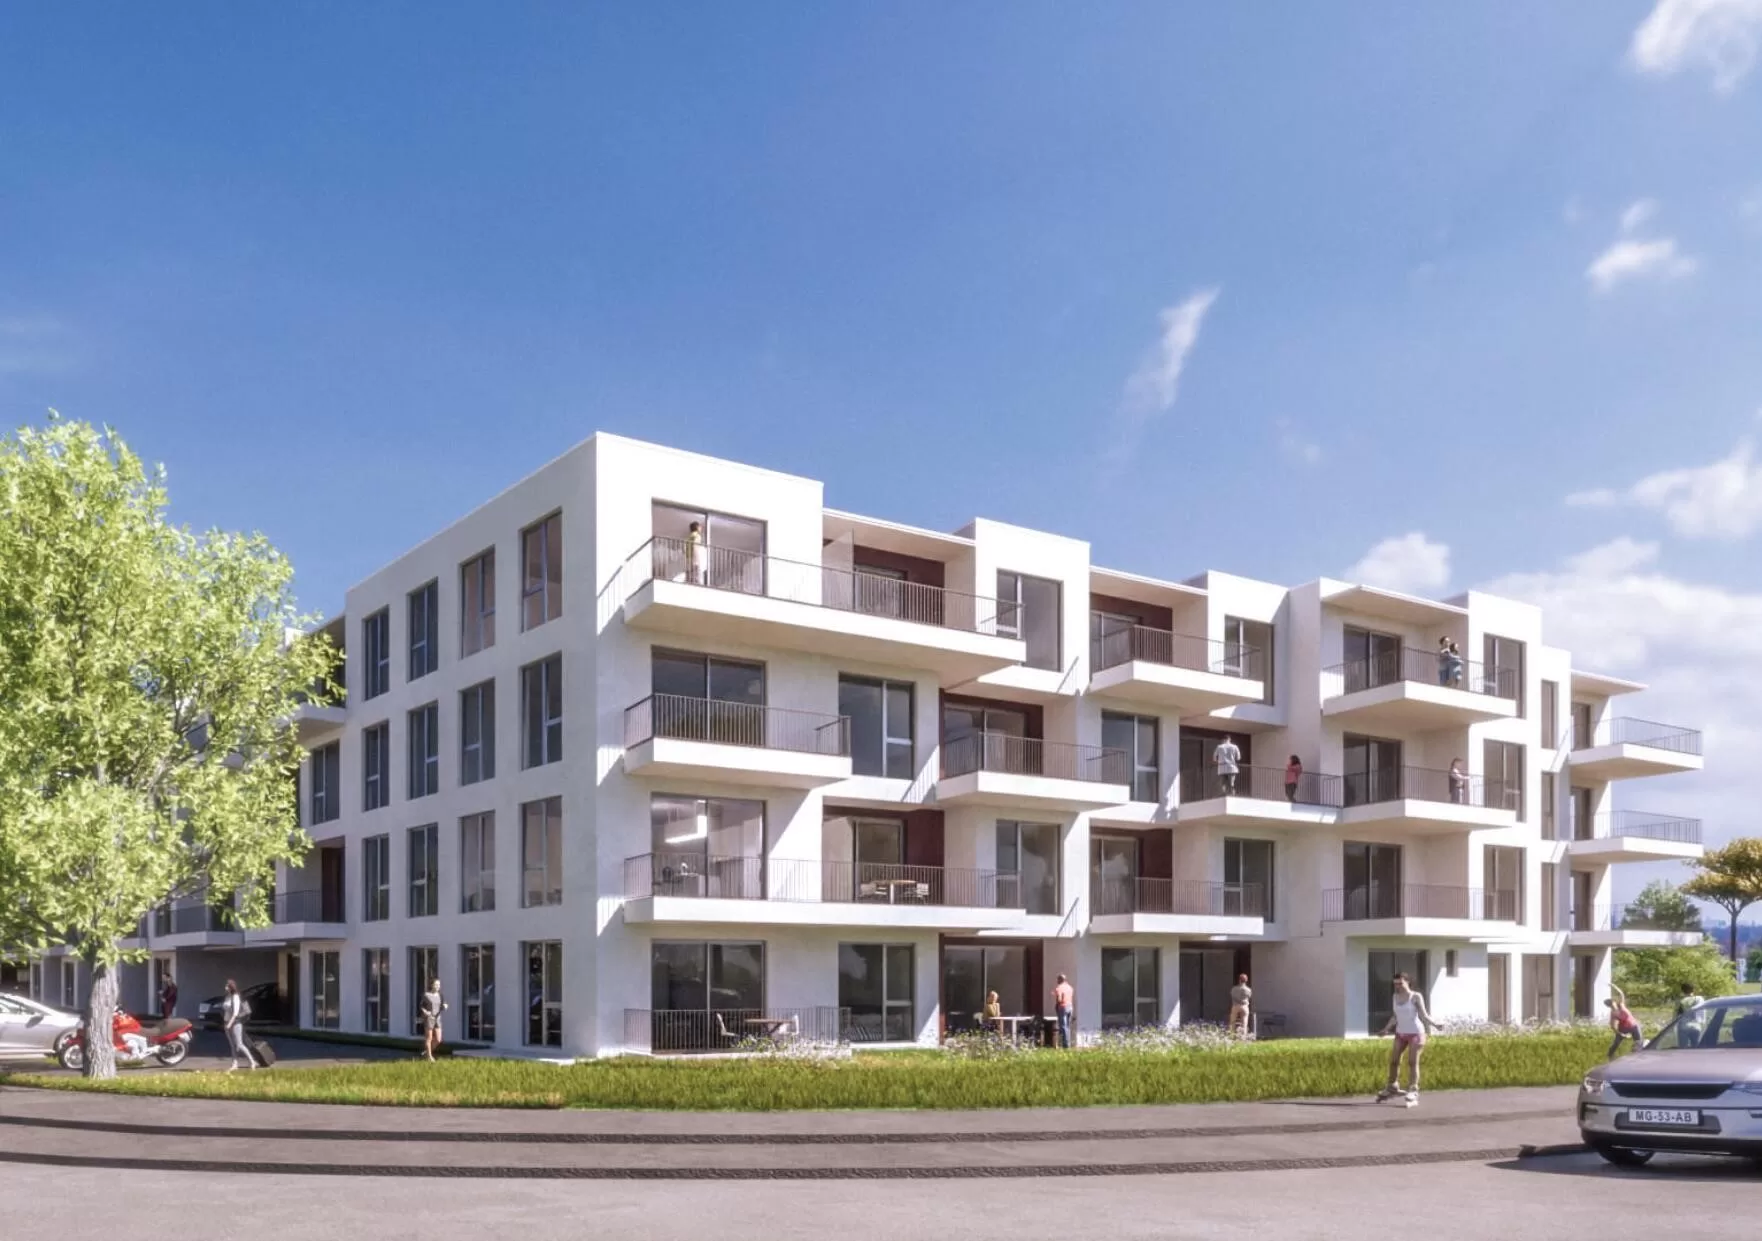 A new high quality residence with 122 units in the secong city ring of Umag, Istria, Croatia. Apartments from 35m2 to 87m2 for sale. Within 1 km there are all facilities, grocery stores, school, hospital, sports fields, hospital, school, kindergarten